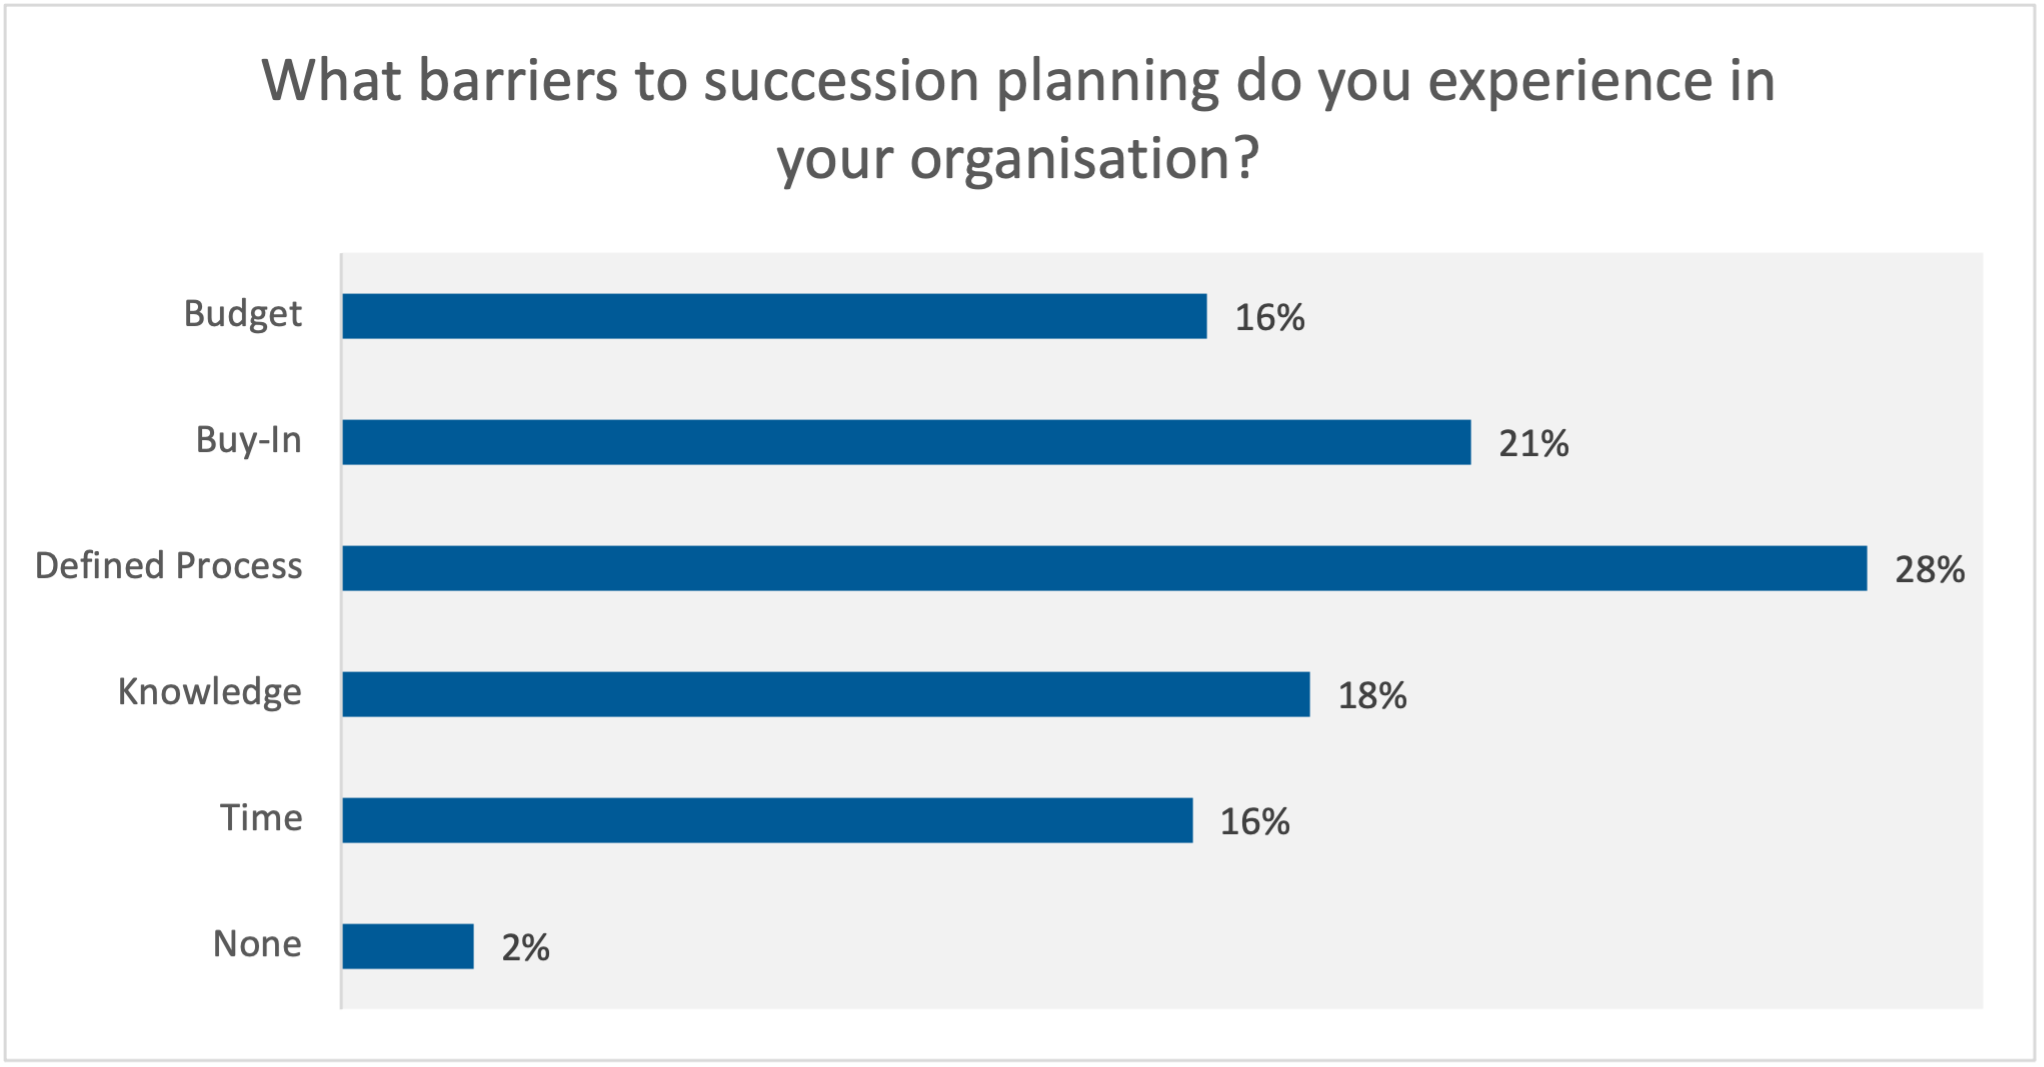 Poll 2 - Barriers to Succession